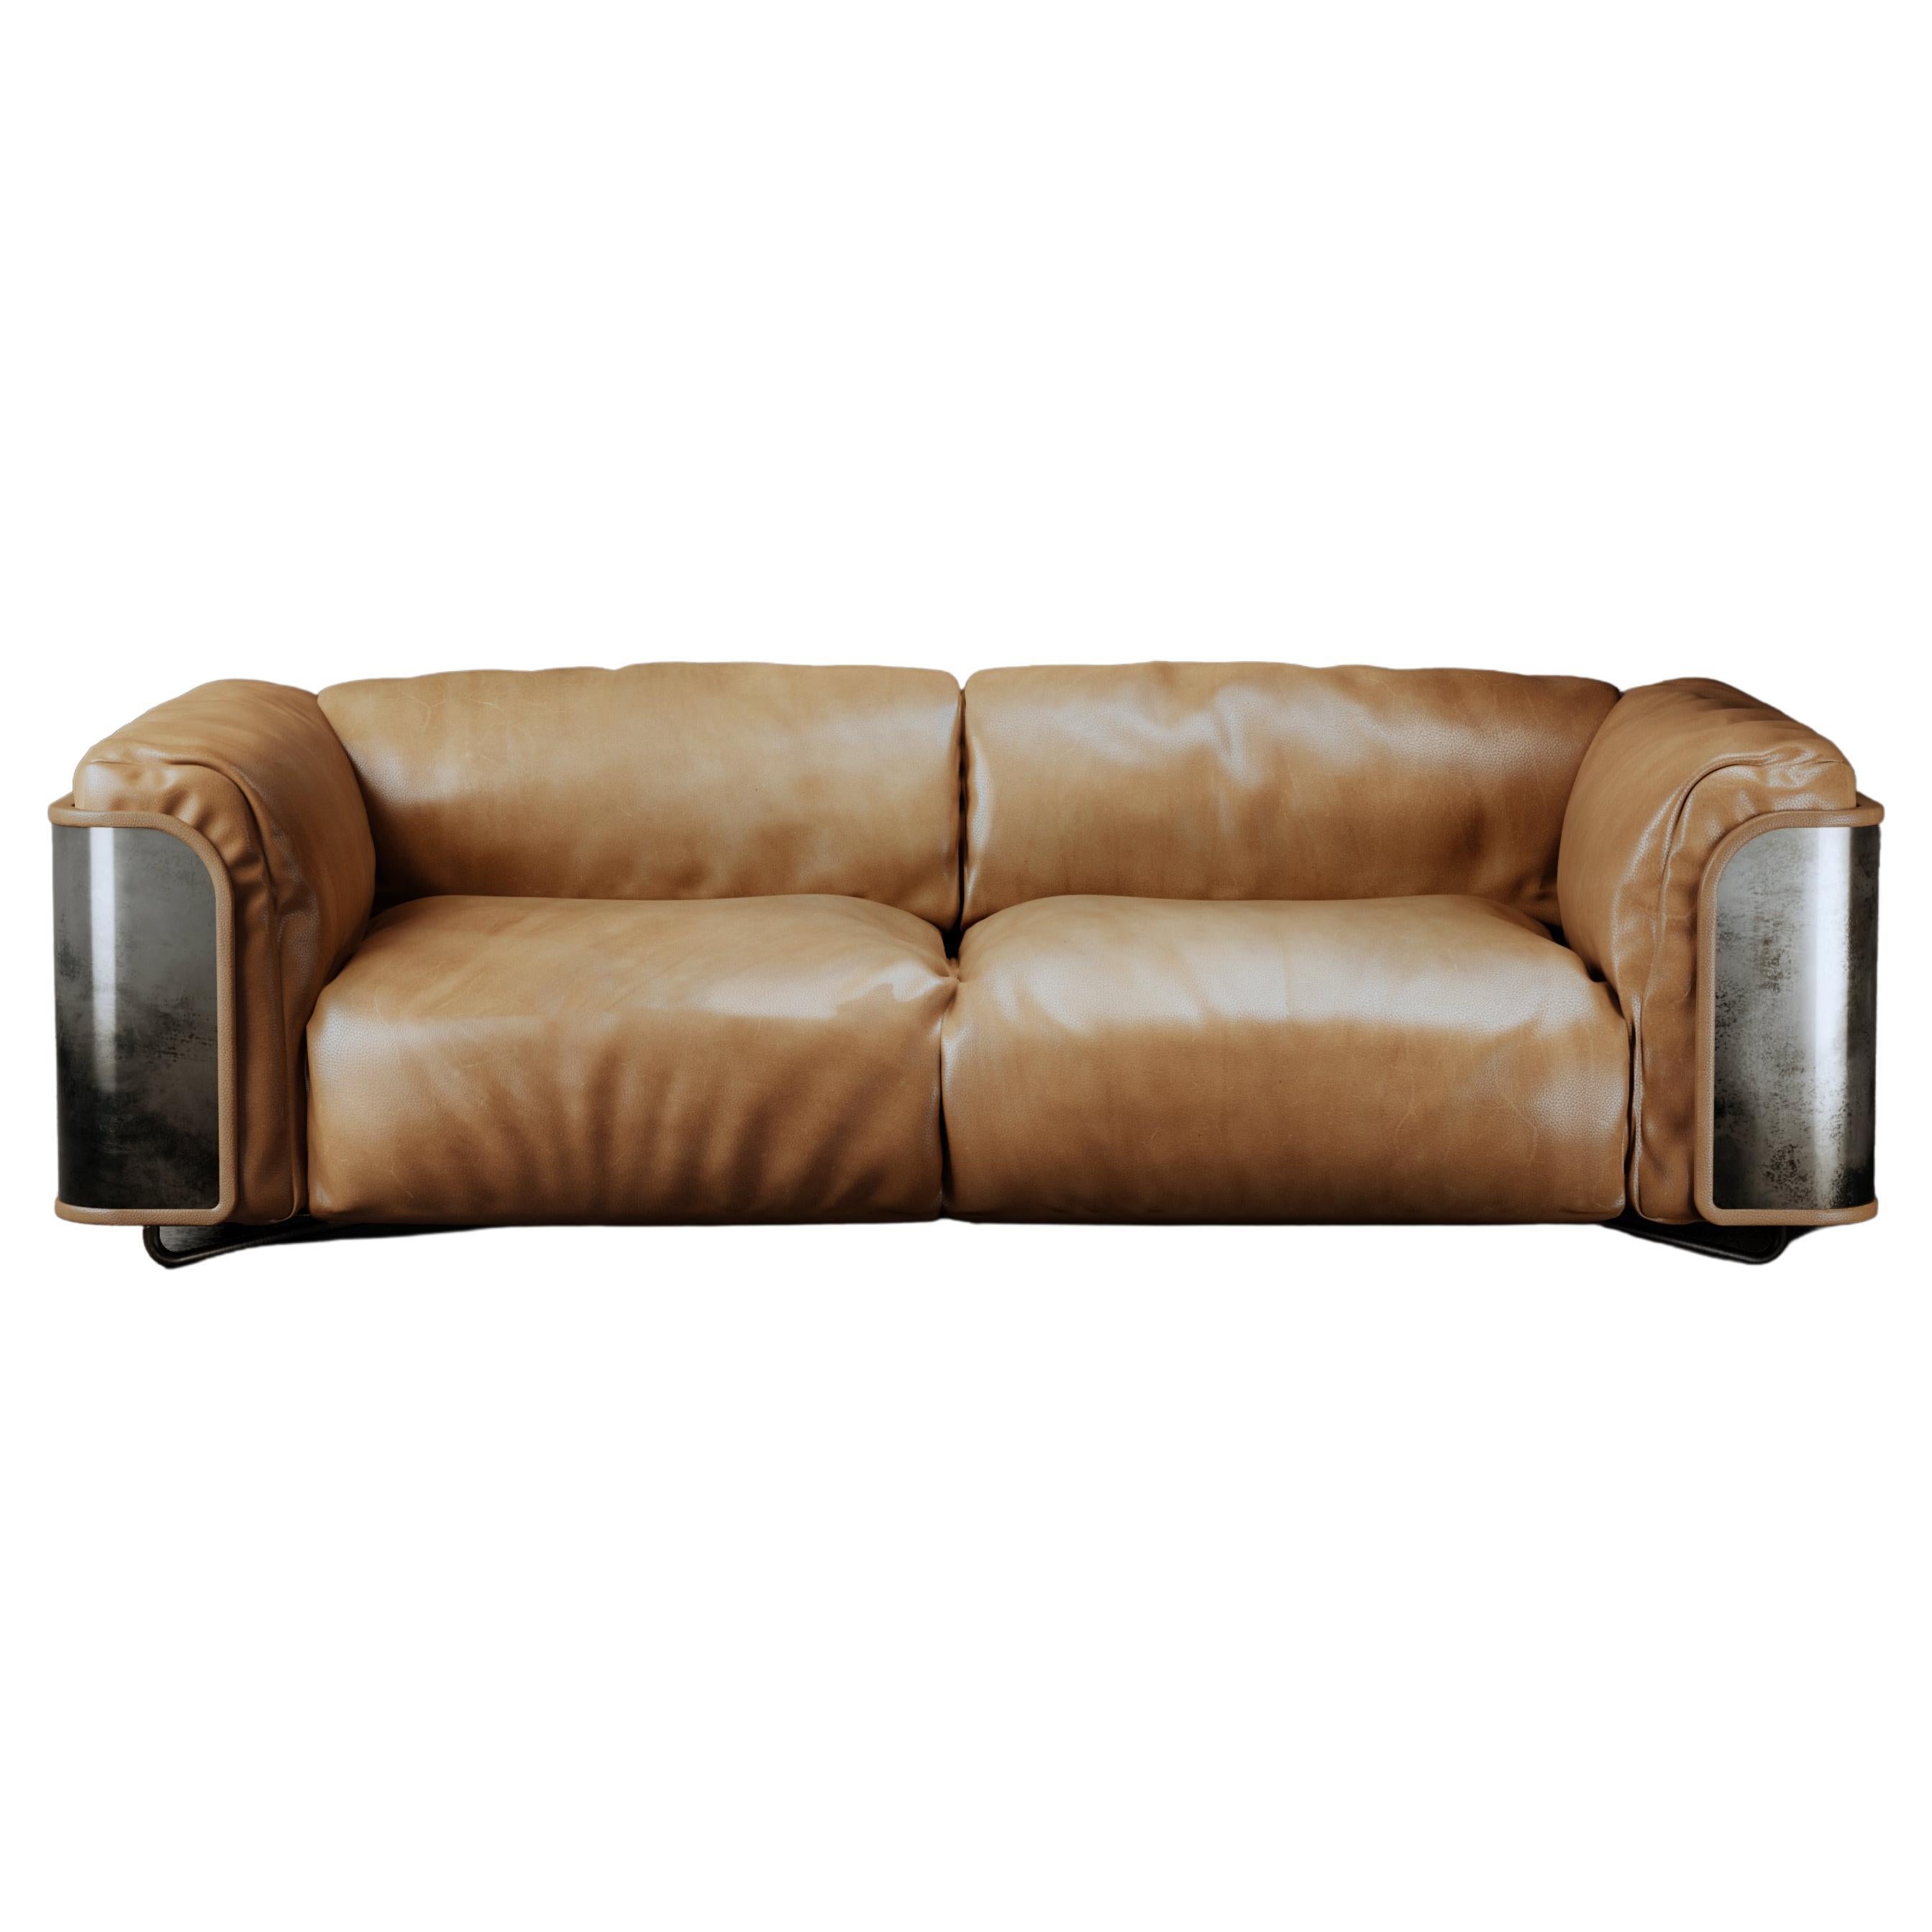 Saint-Germain 2-Seat Sofa in Sella Touch Leather and raw Silver For Sale